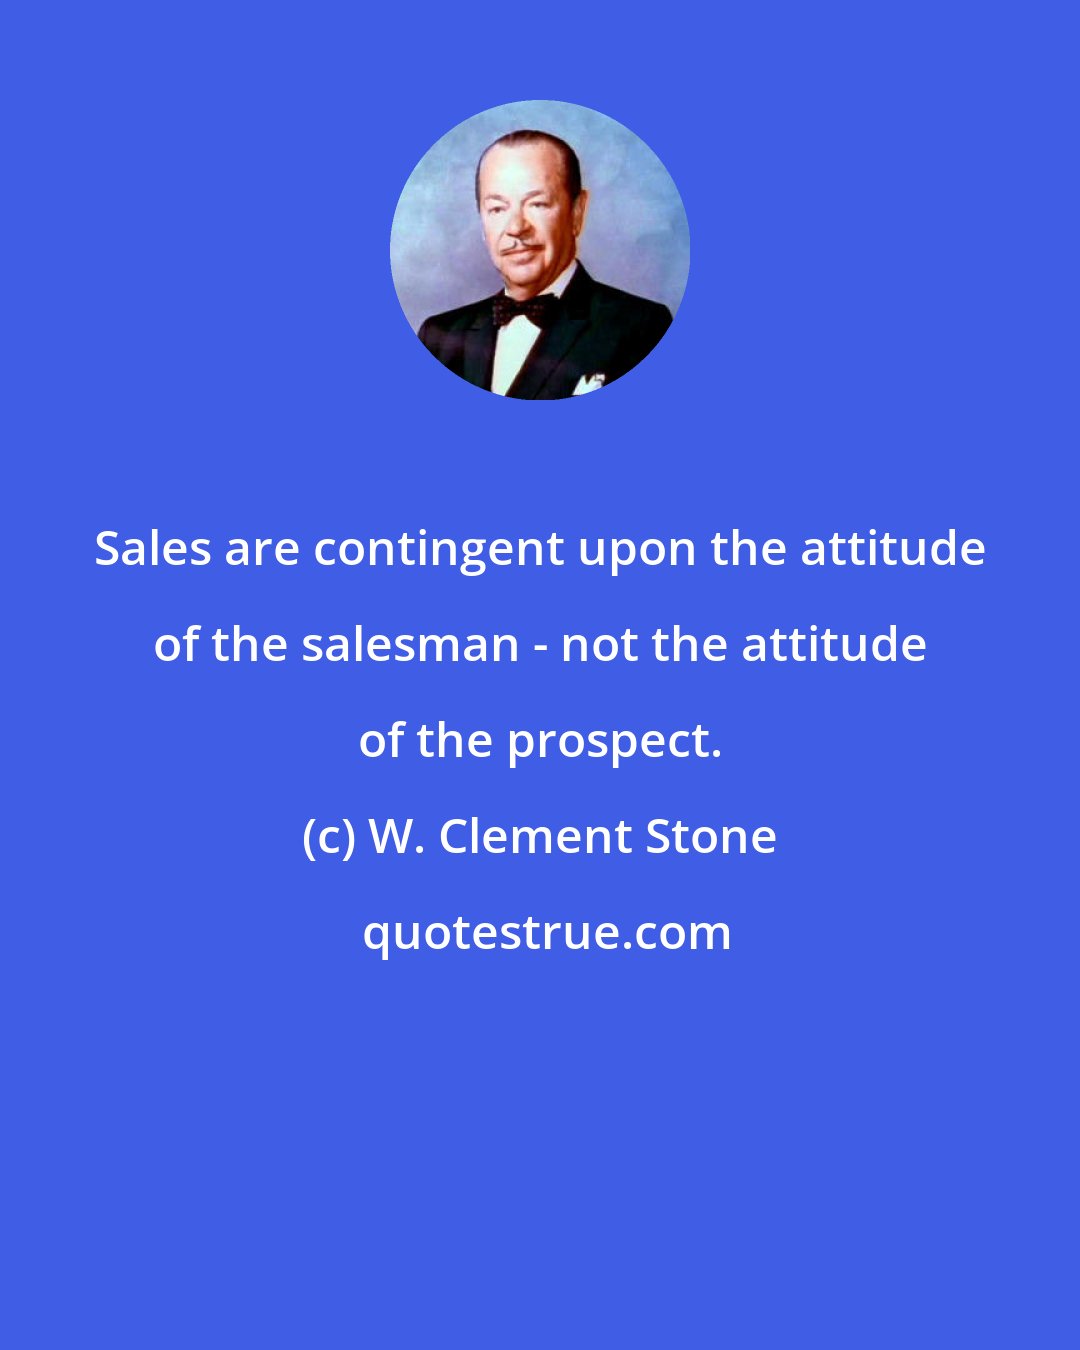 W. Clement Stone: Sales are contingent upon the attitude of the salesman - not the attitude of the prospect.